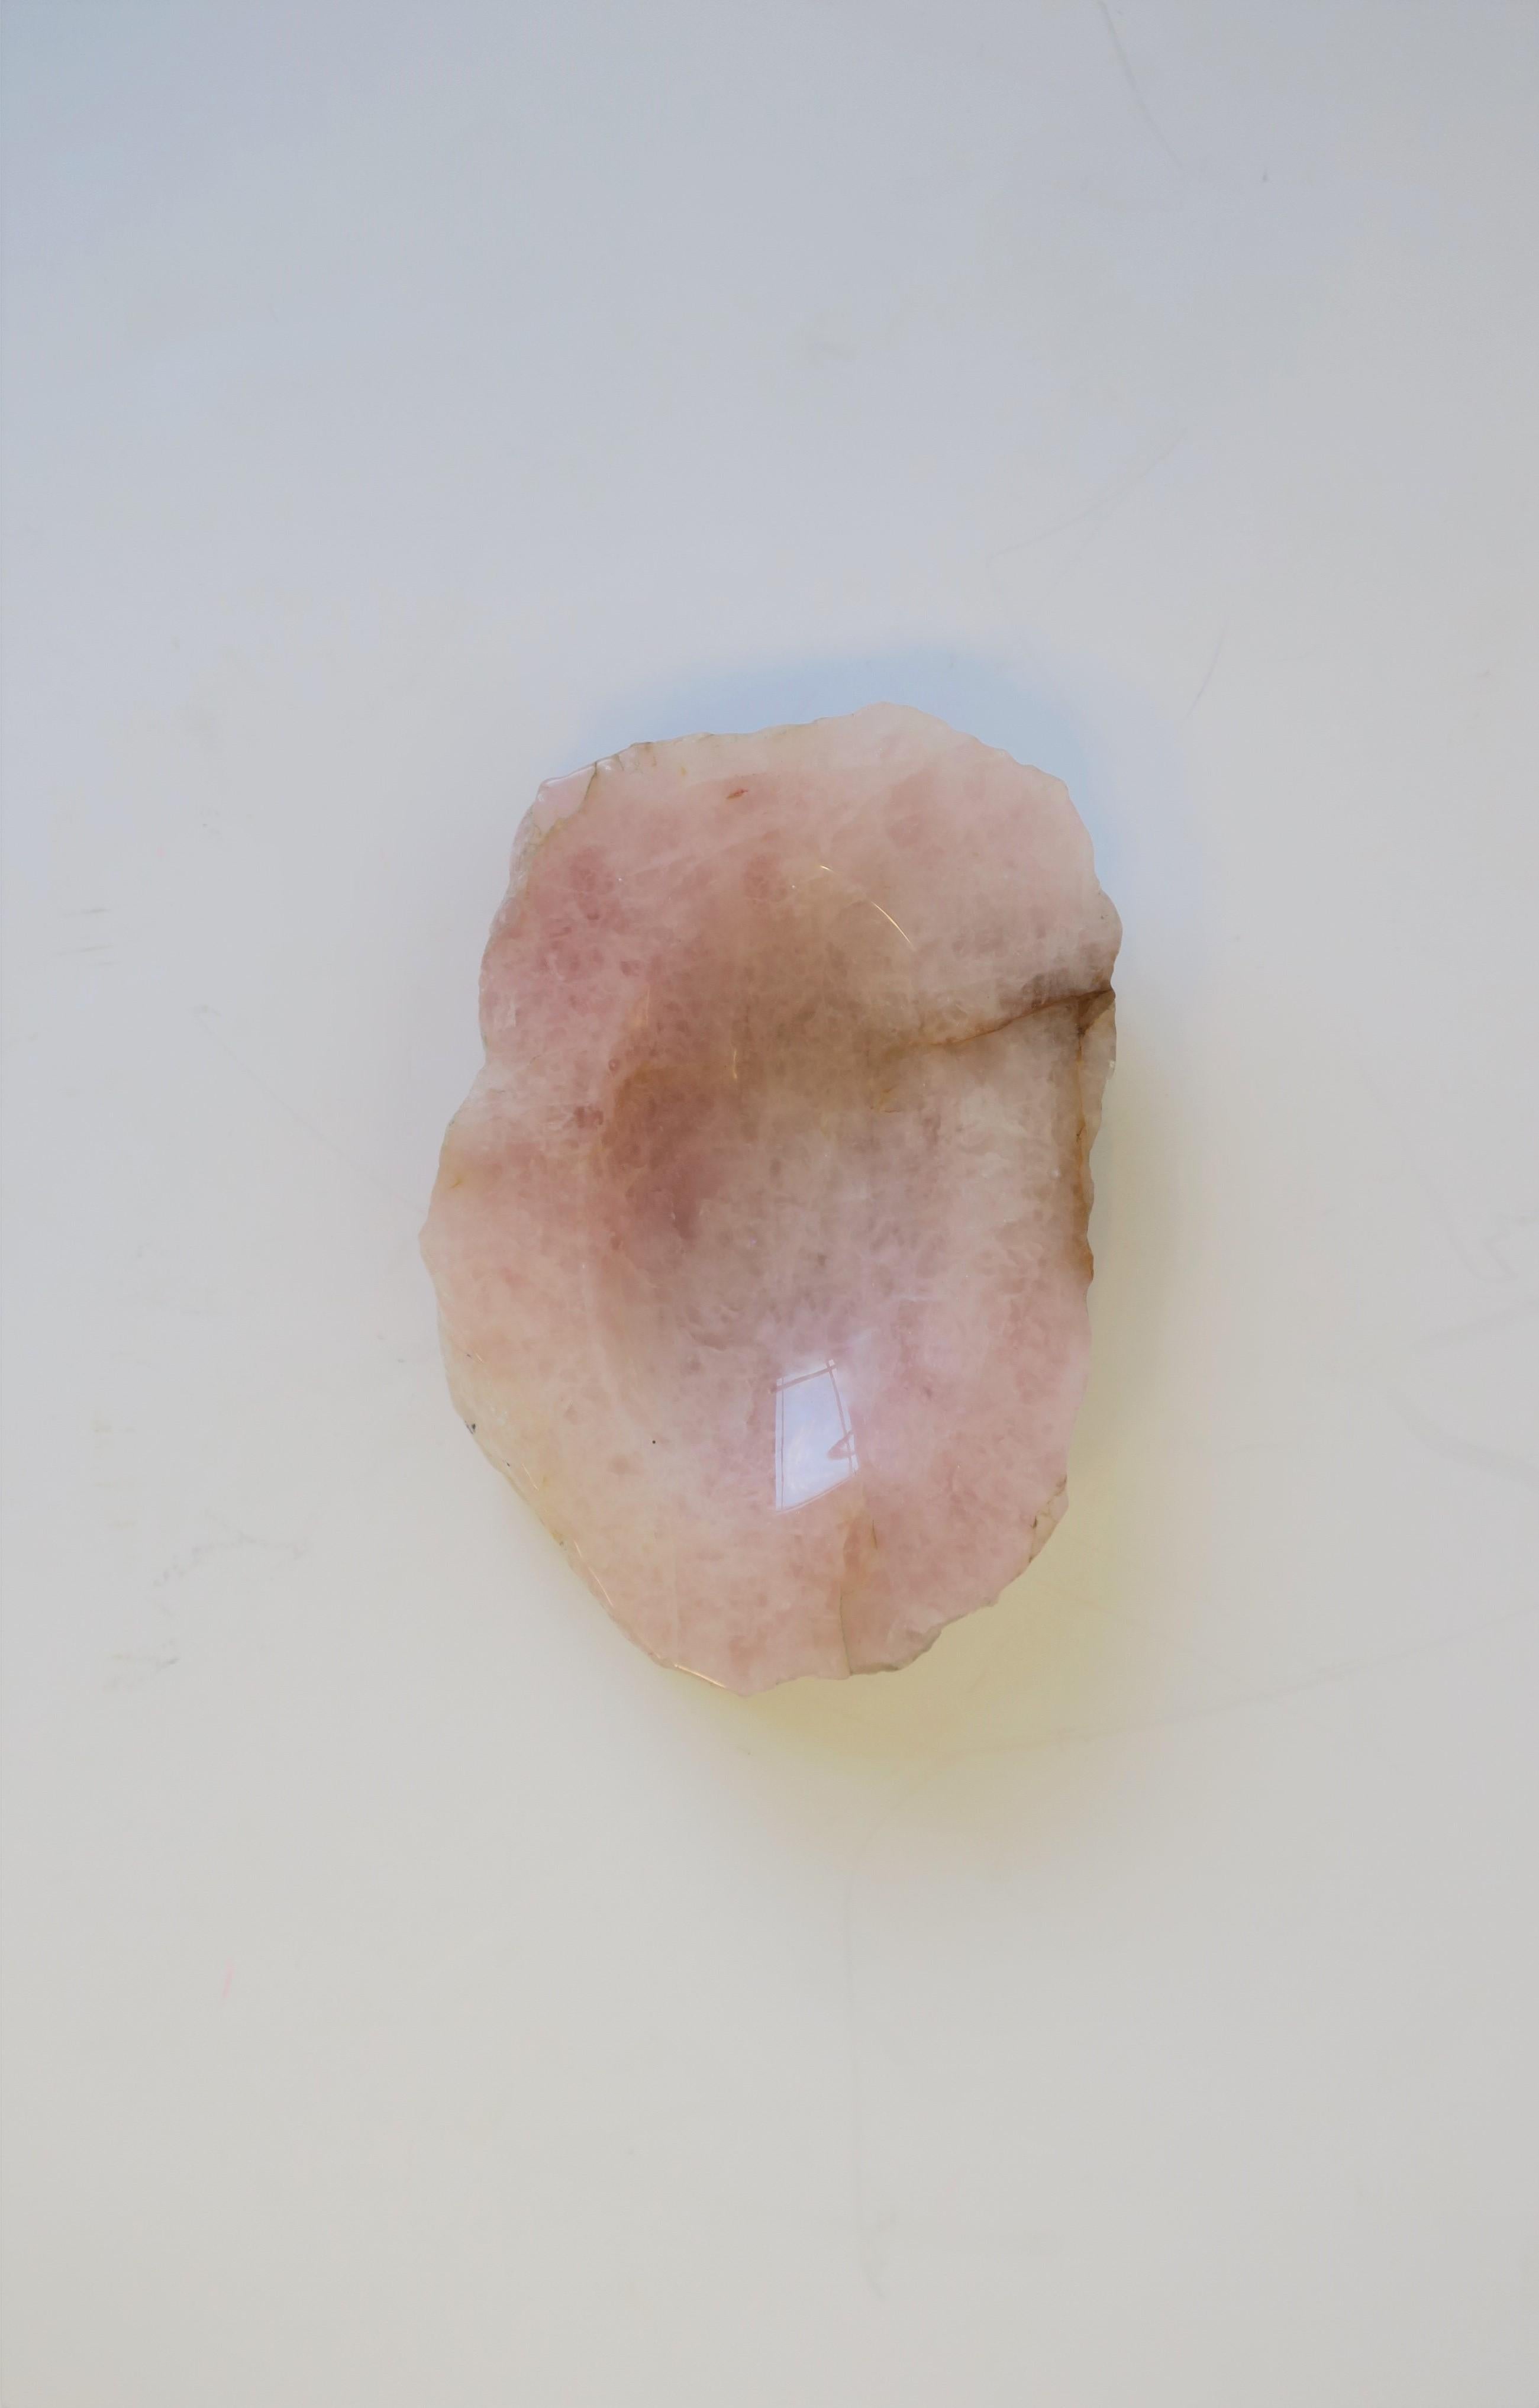 A beautiful and substantial pink rose quartz polished vessel, jewelry or dish, circa 20th century. A beautiful piece with polished oval surface/indent to hold small items or jewelry (as demonstrated) on a desk, vanity, walk-in-closet, nightstand